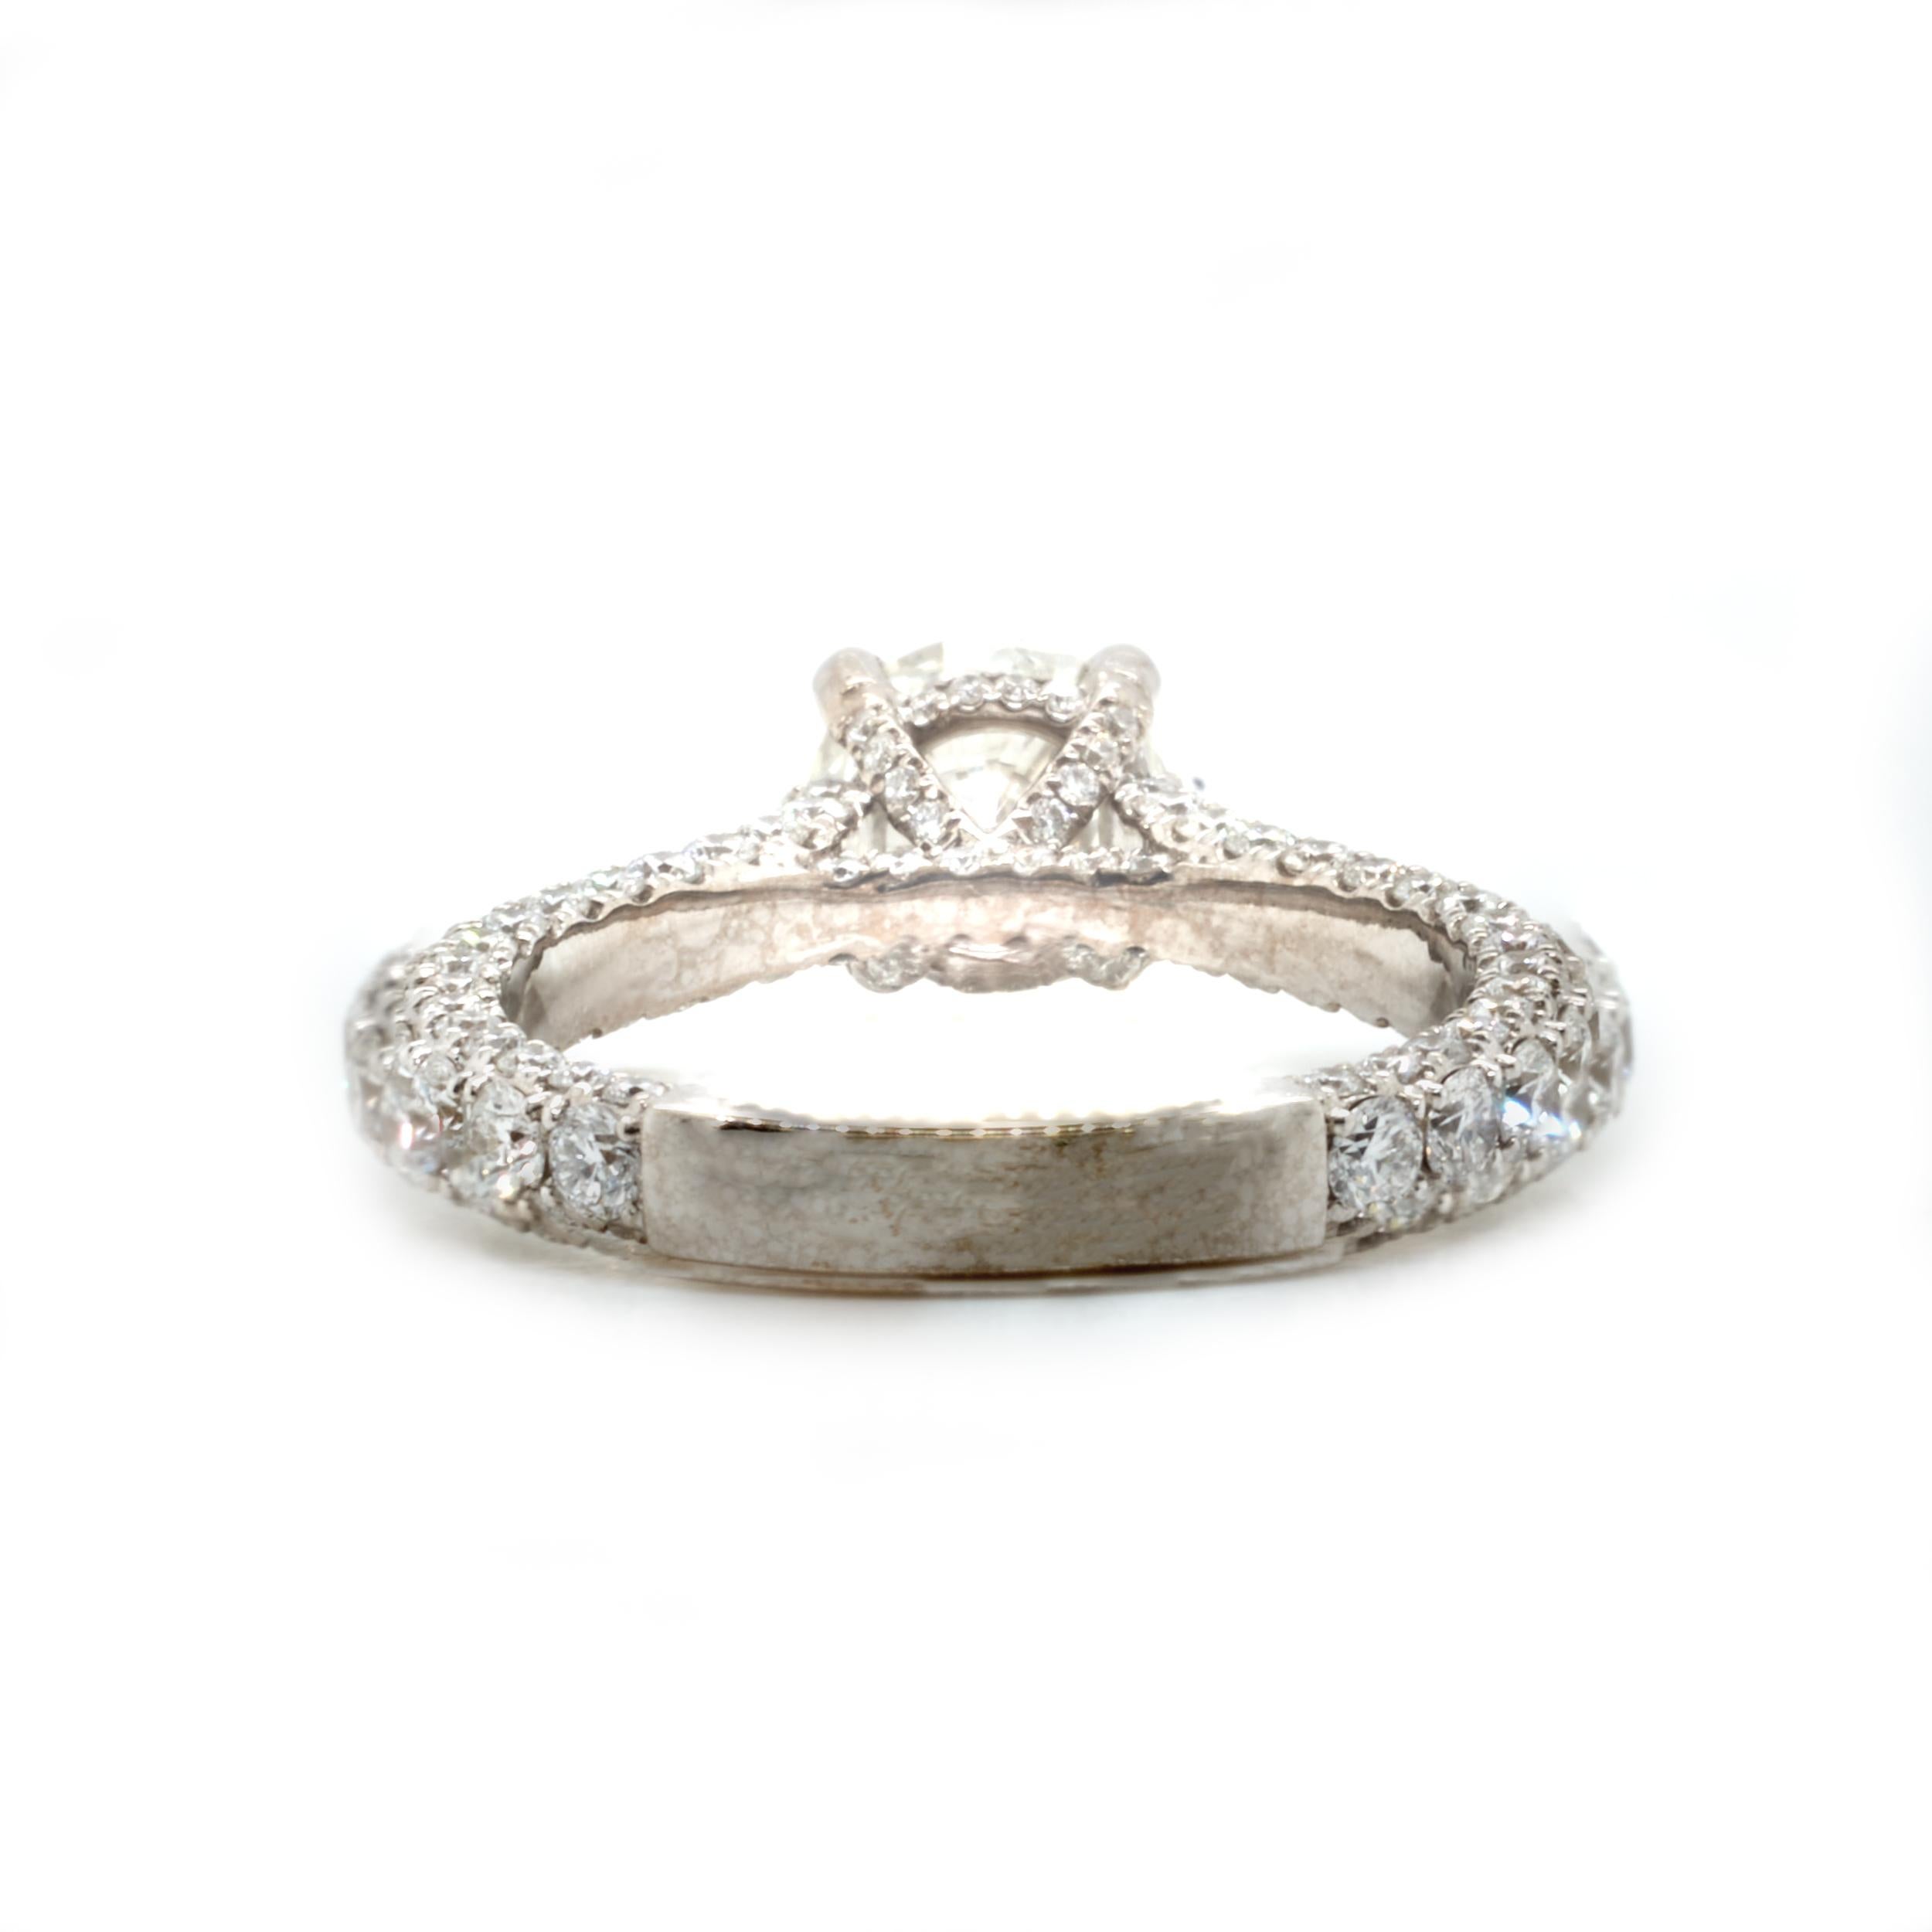 14 Karat White Gold 1.21ct Round Diamond Engagement Ring In Excellent Condition For Sale In Scottsdale, AZ